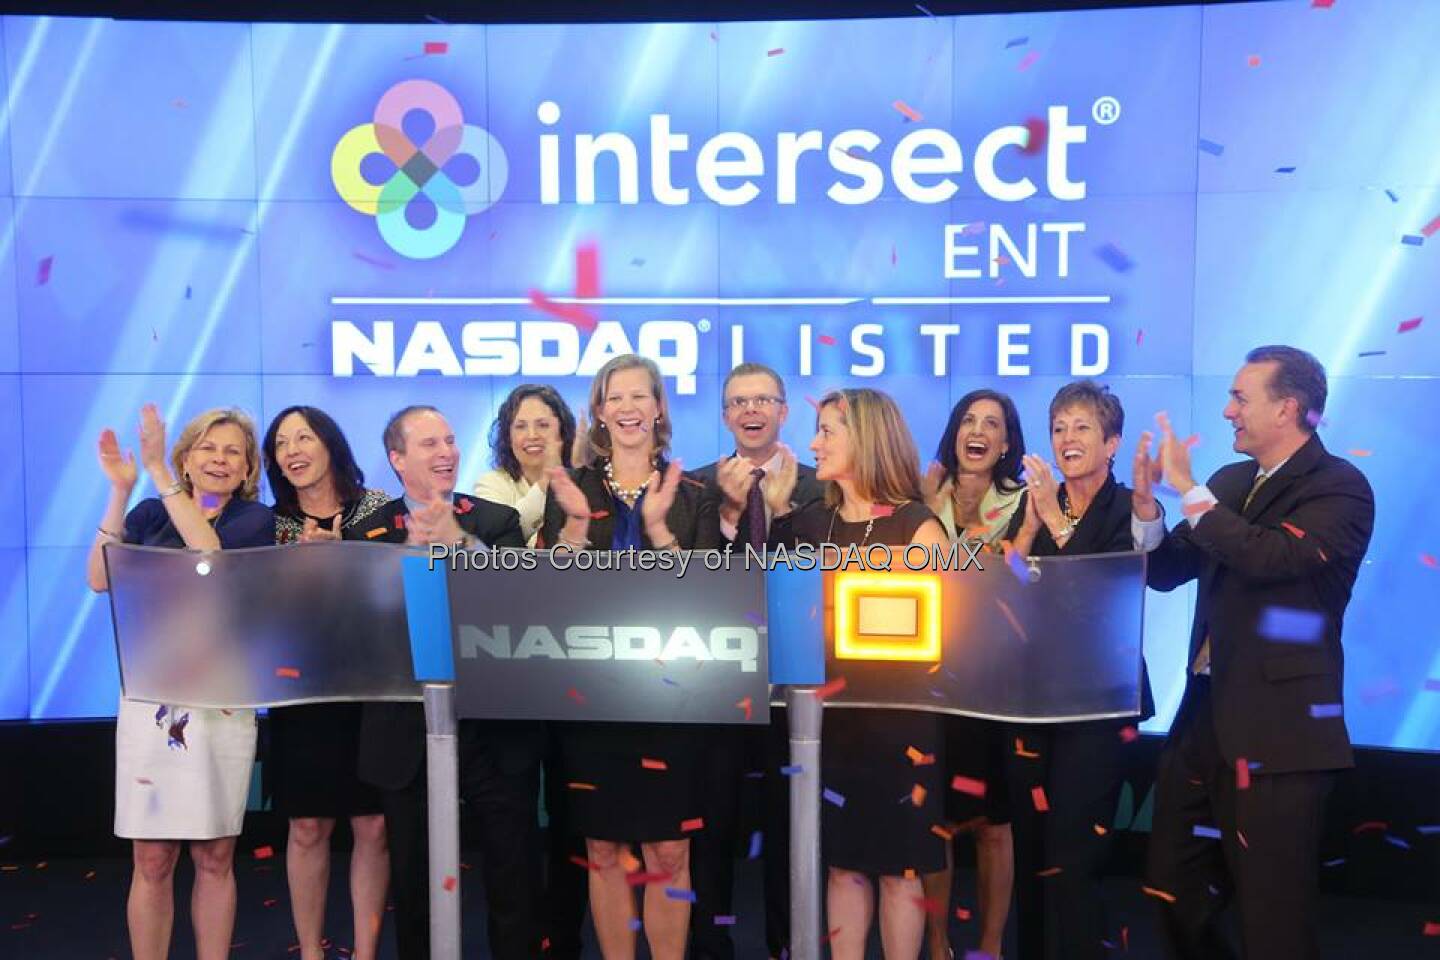 Great photos of Intersect ENT celebrating its #IPO by ringing the #NASDAQ Opening Bell! #dreamBIG $XENT  Source: http://facebook.com/NASDAQ